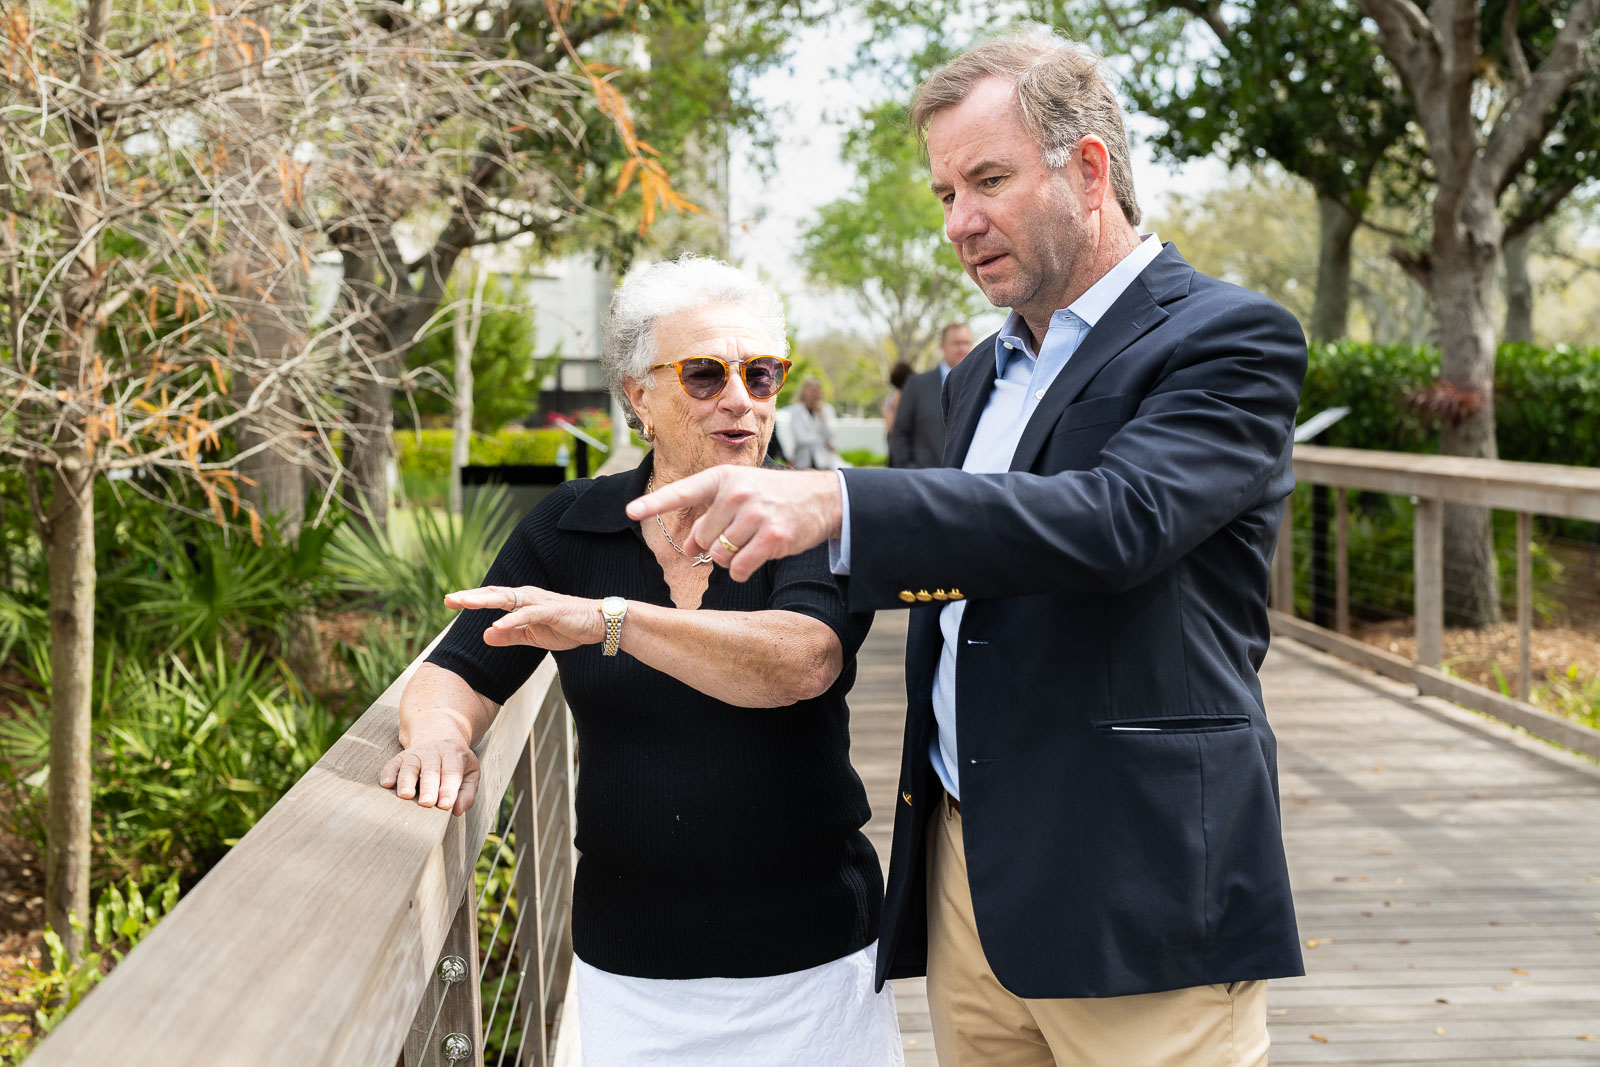 A person pointing at an older person